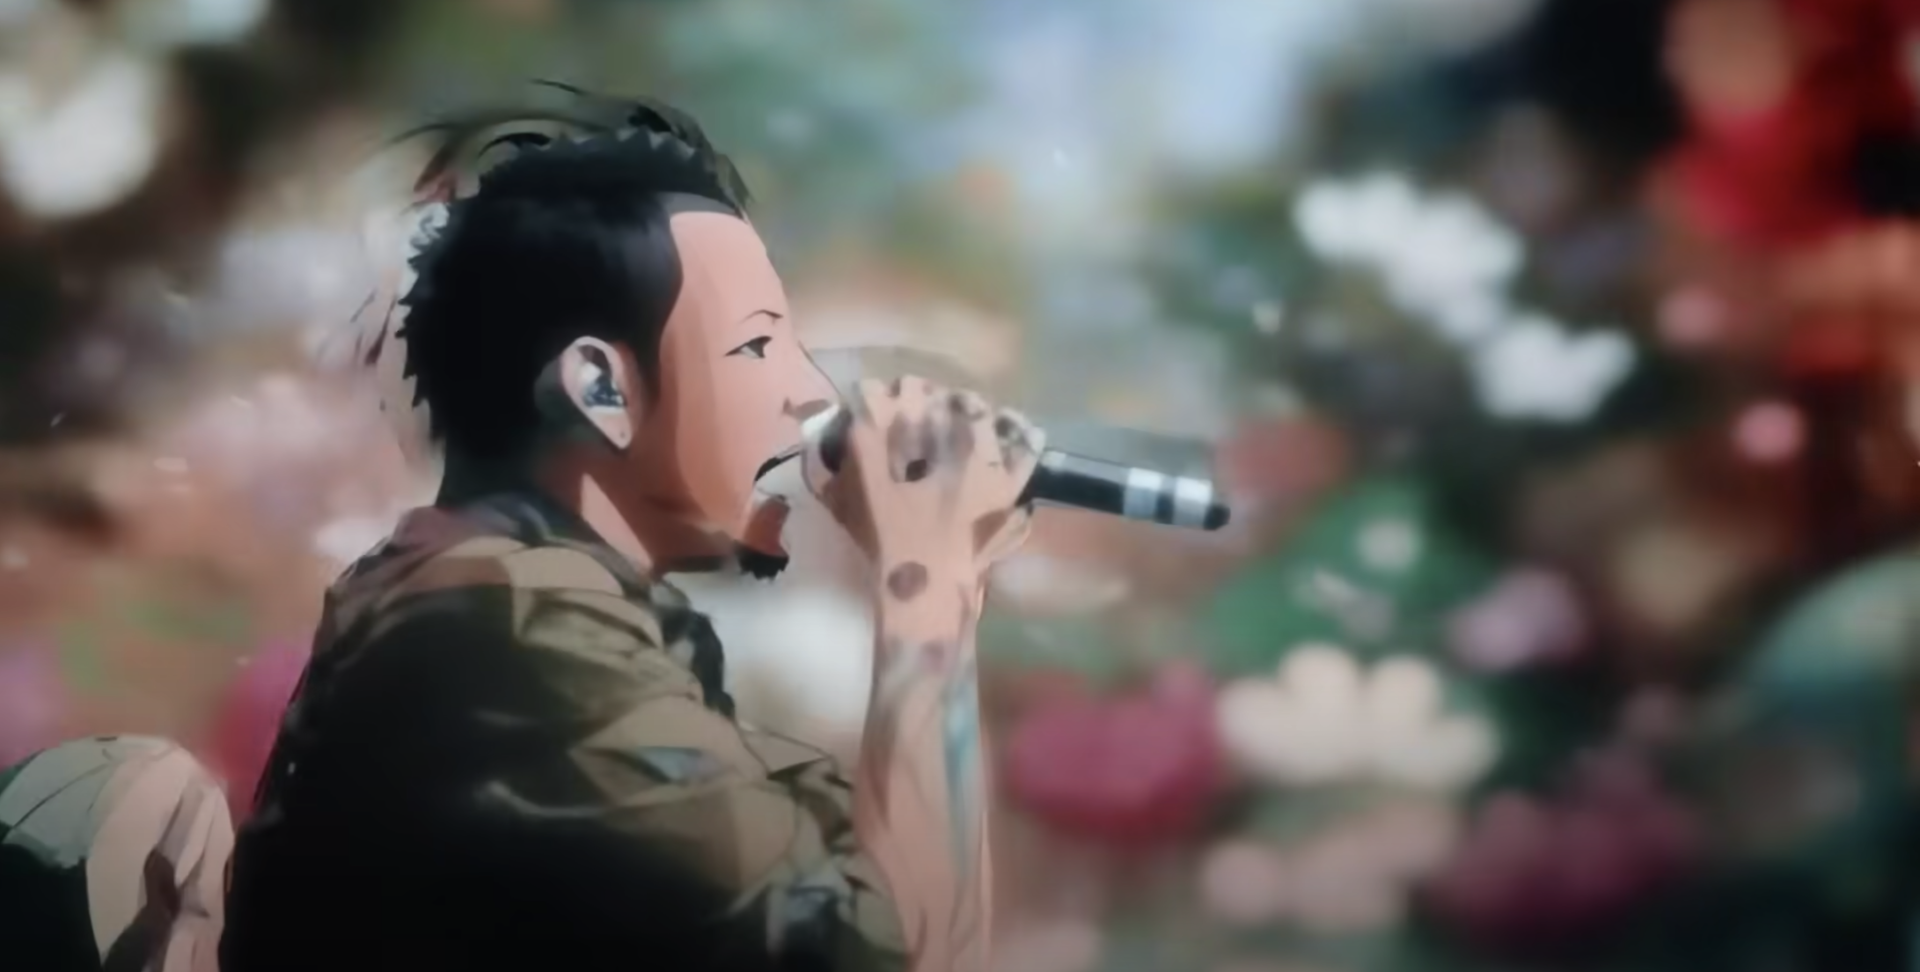 Chester's Memory Lives On With Linkin Park's “lost”